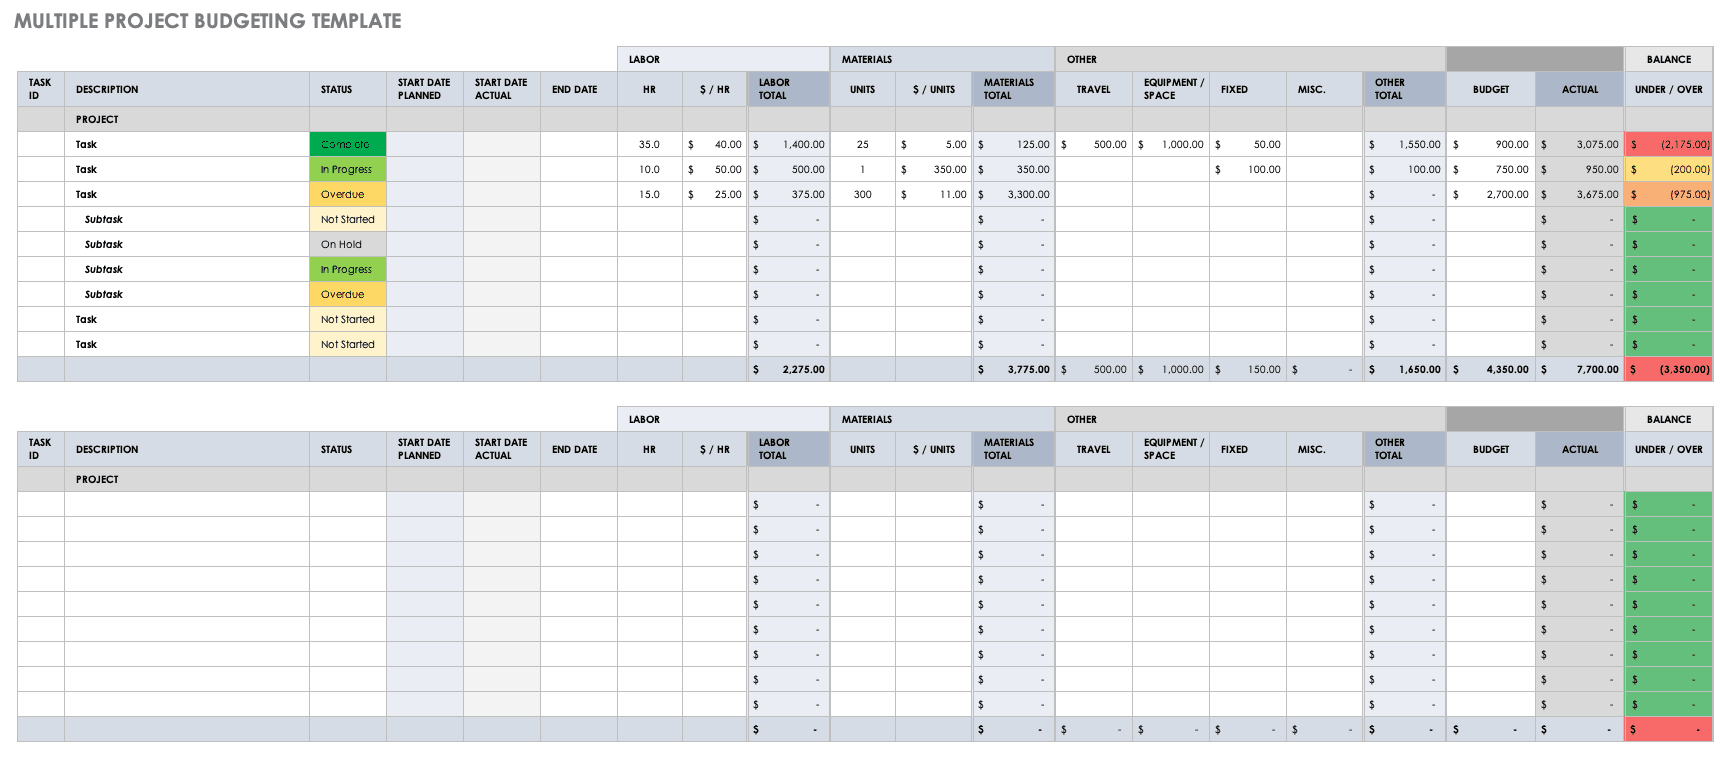 Multiple Project Budgeting Template